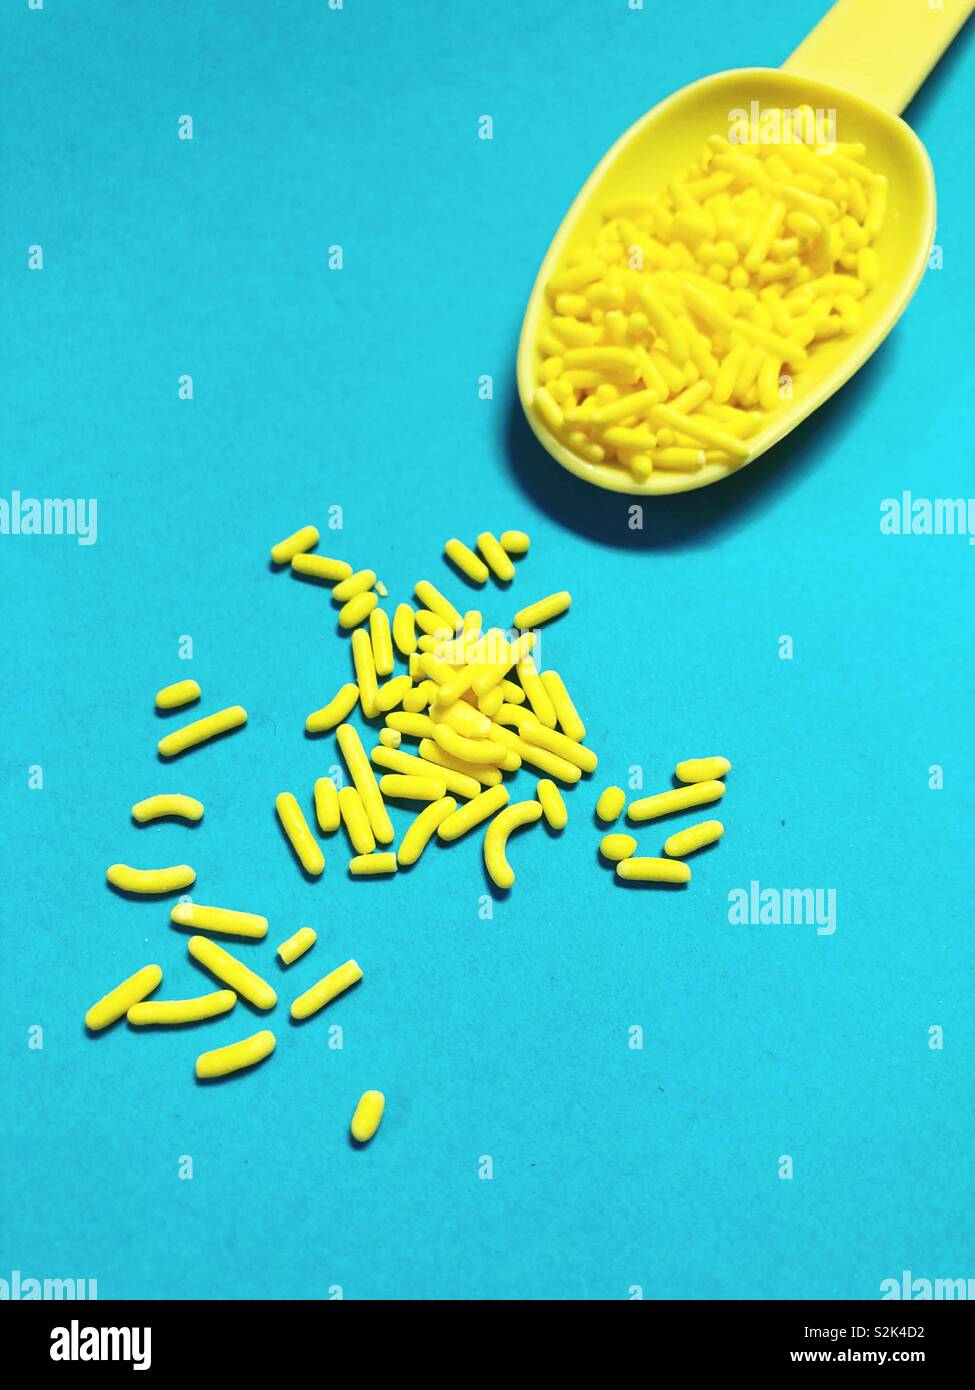 Yellow candy sprinkles on a blue background. Stock Photo